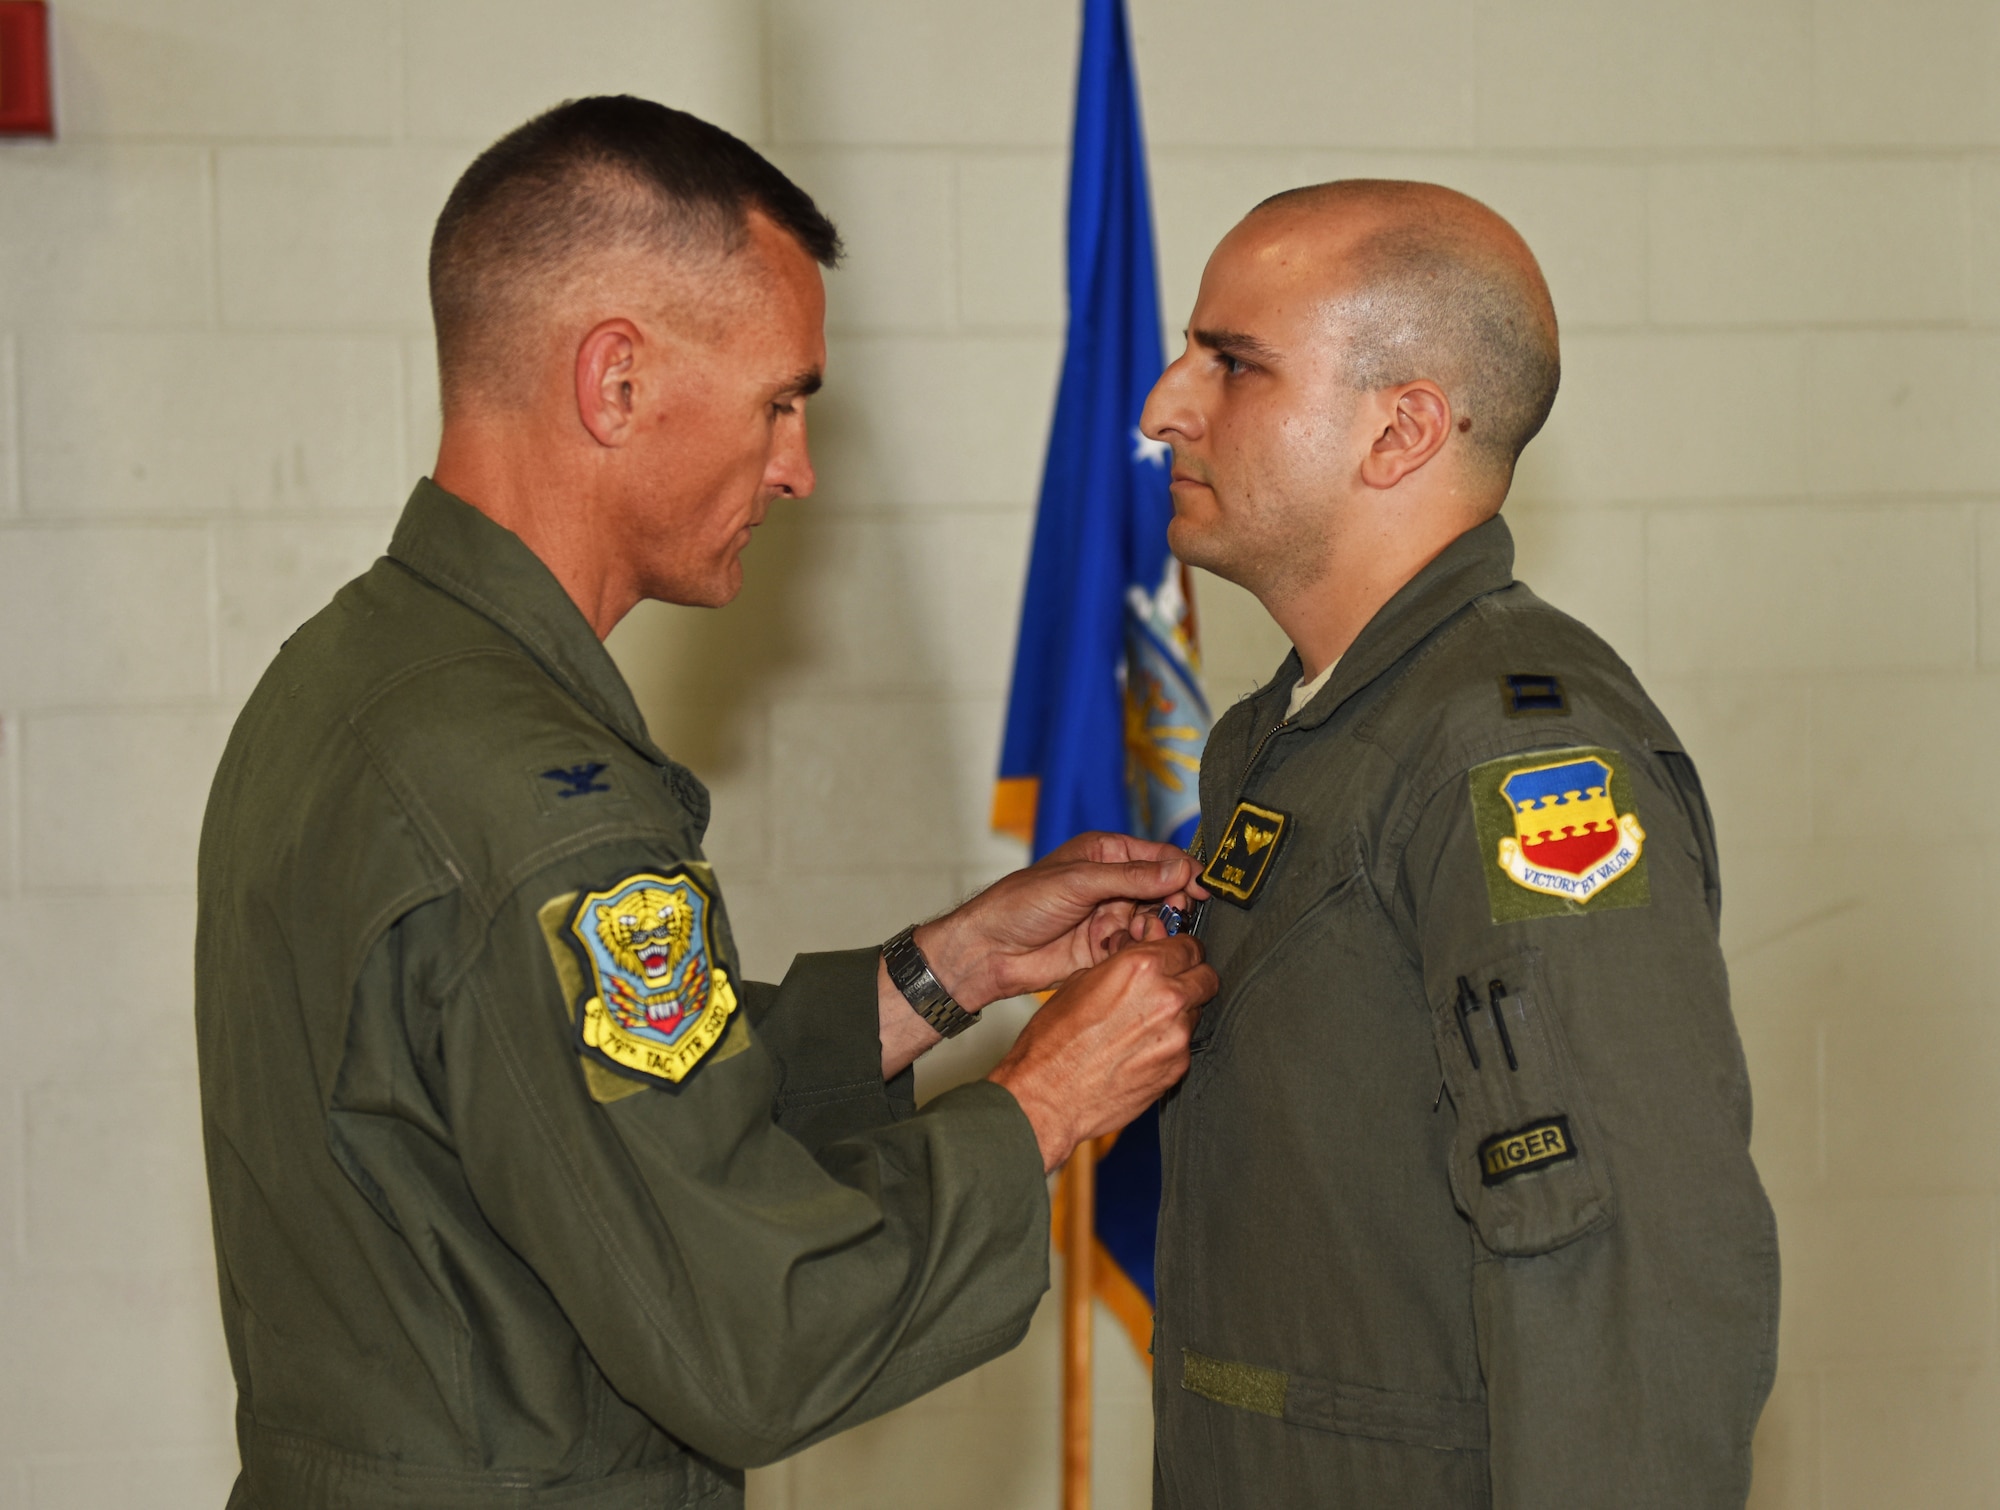 U.S. Air Force Col. Daniel Lasica, former 20th Fighter Wing commander, presents the Distinguished Flying Cross (DFC) to Capt. Salvador A. Cruz, 79th Fighter Squadron instructor pilot, at Shaw Air Force Base, S.C., June 7, 2018.